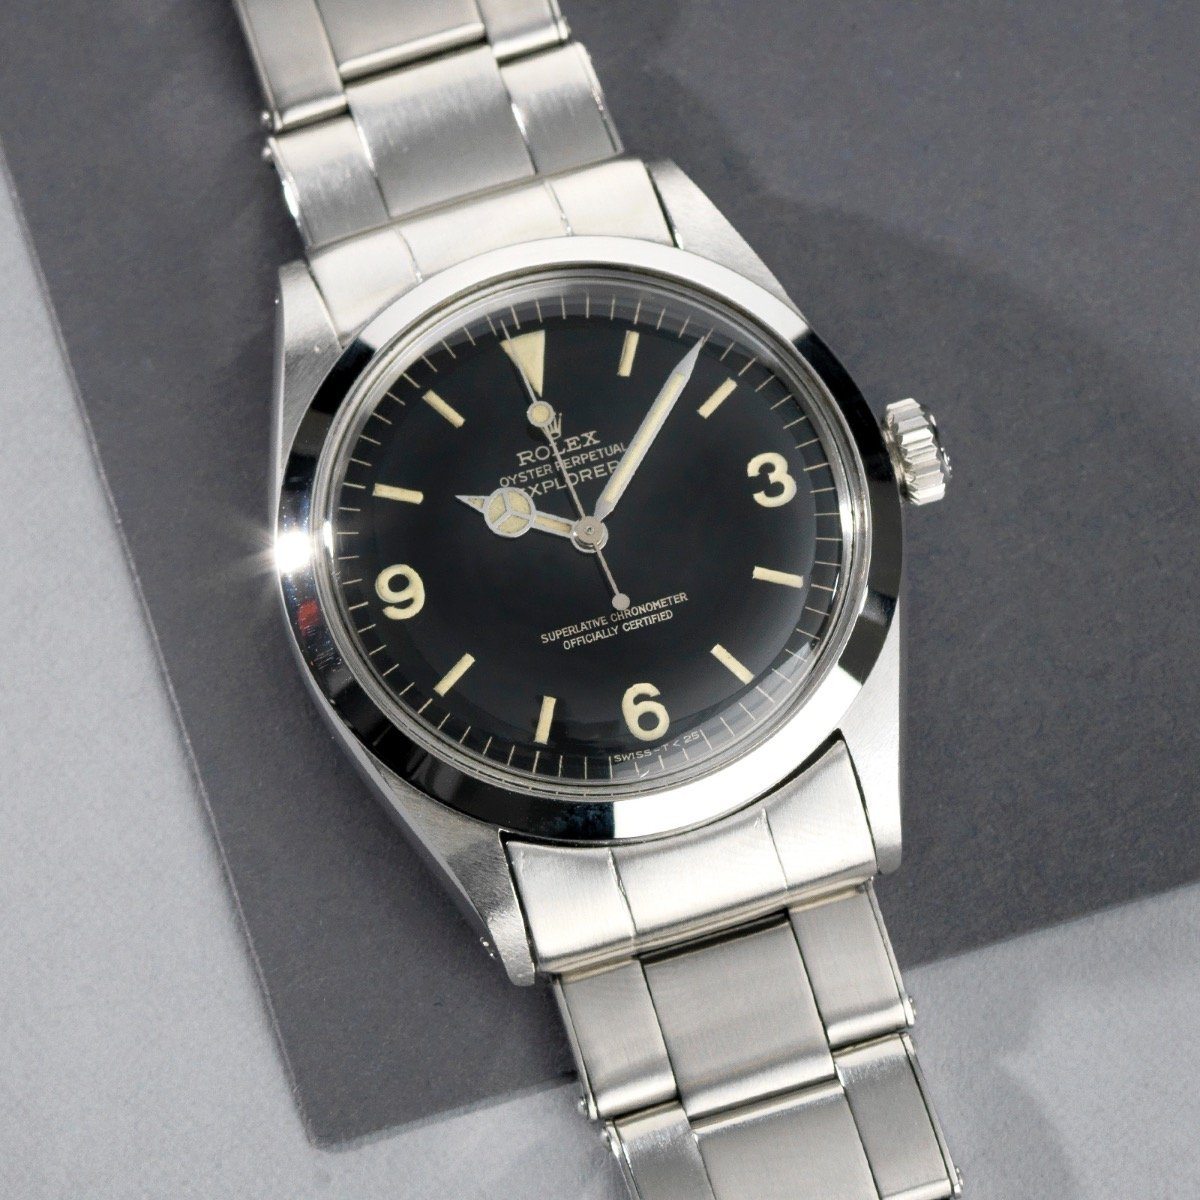 Rolex Explorer Gilt Dial 1016 Box and Papers